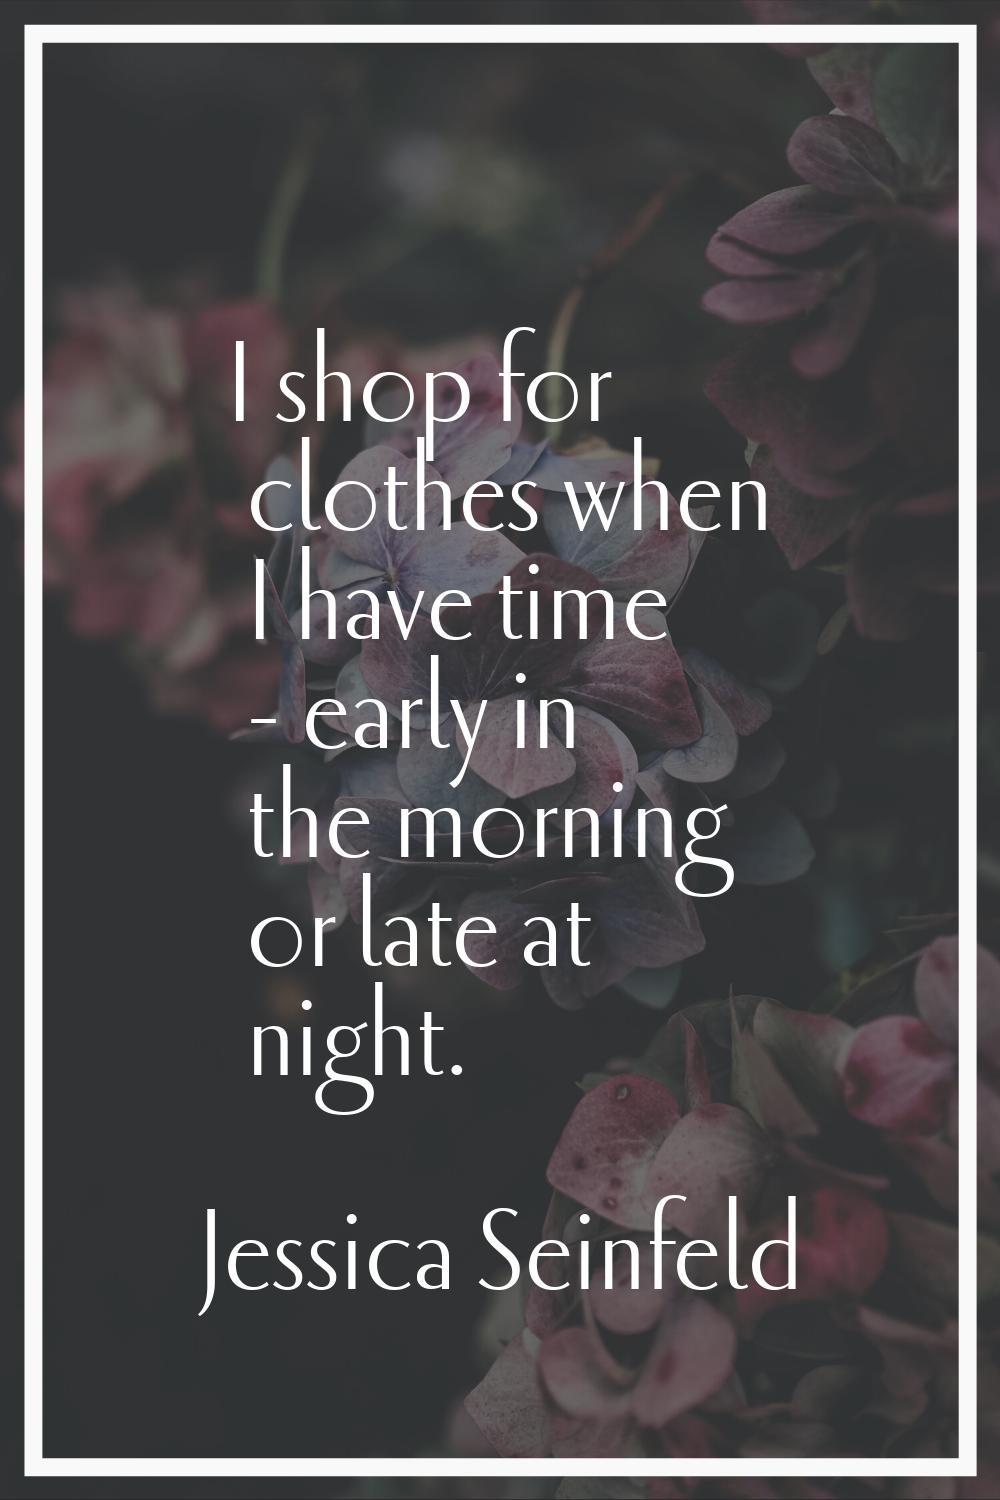 I shop for clothes when I have time - early in the morning or late at night.